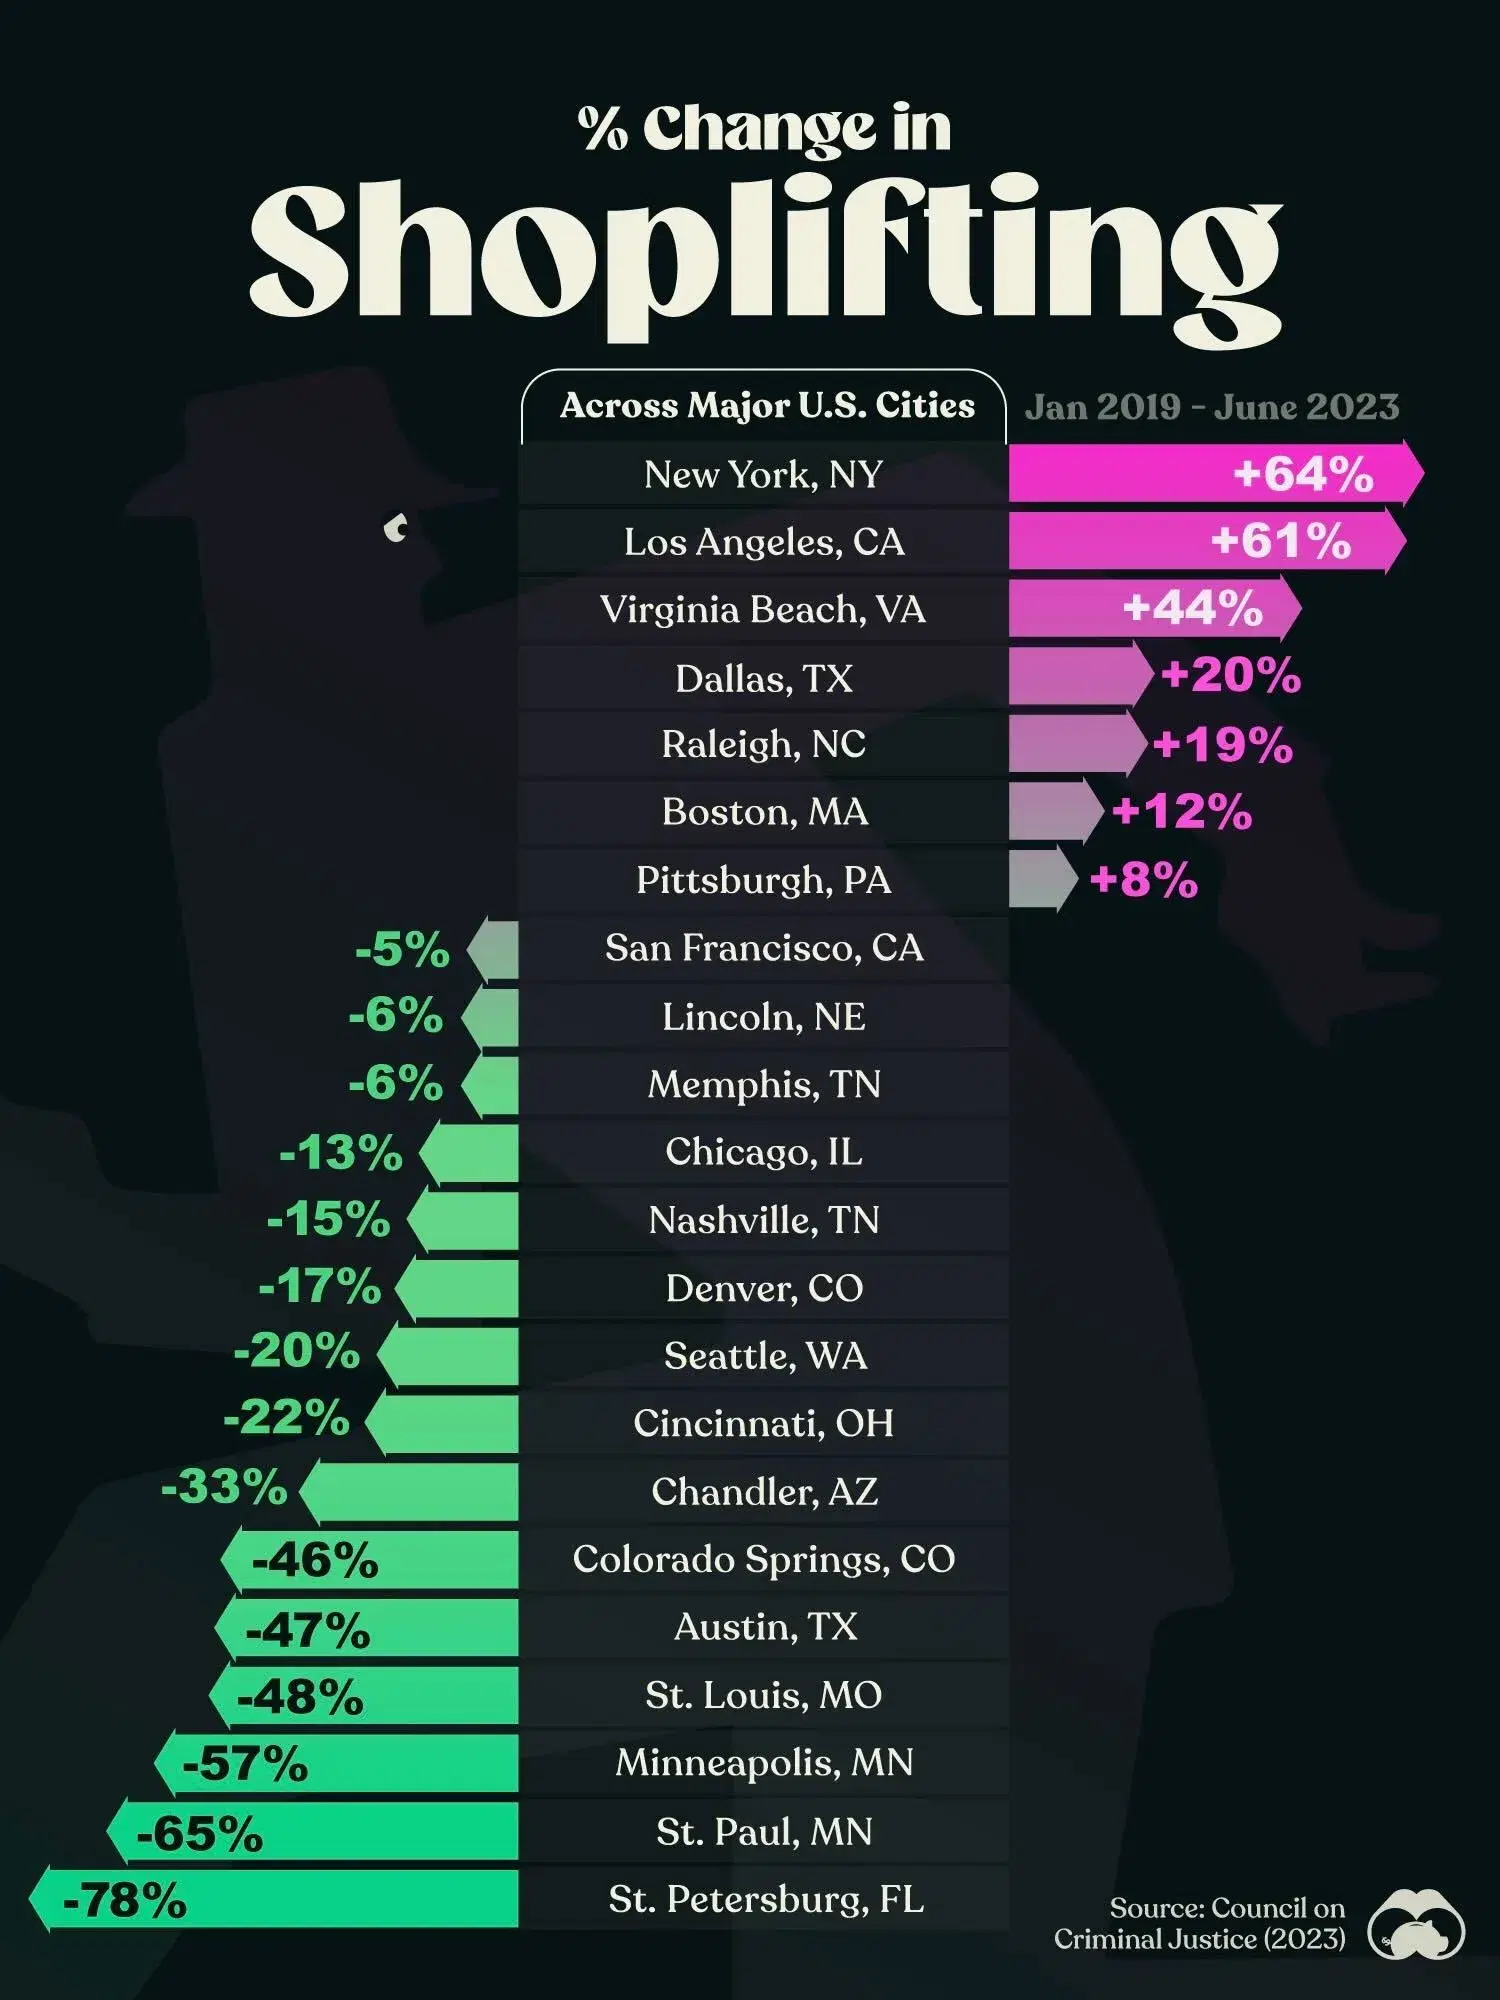 NY and LA Have Seen the Largest Increases in Shoplifting Since 2019